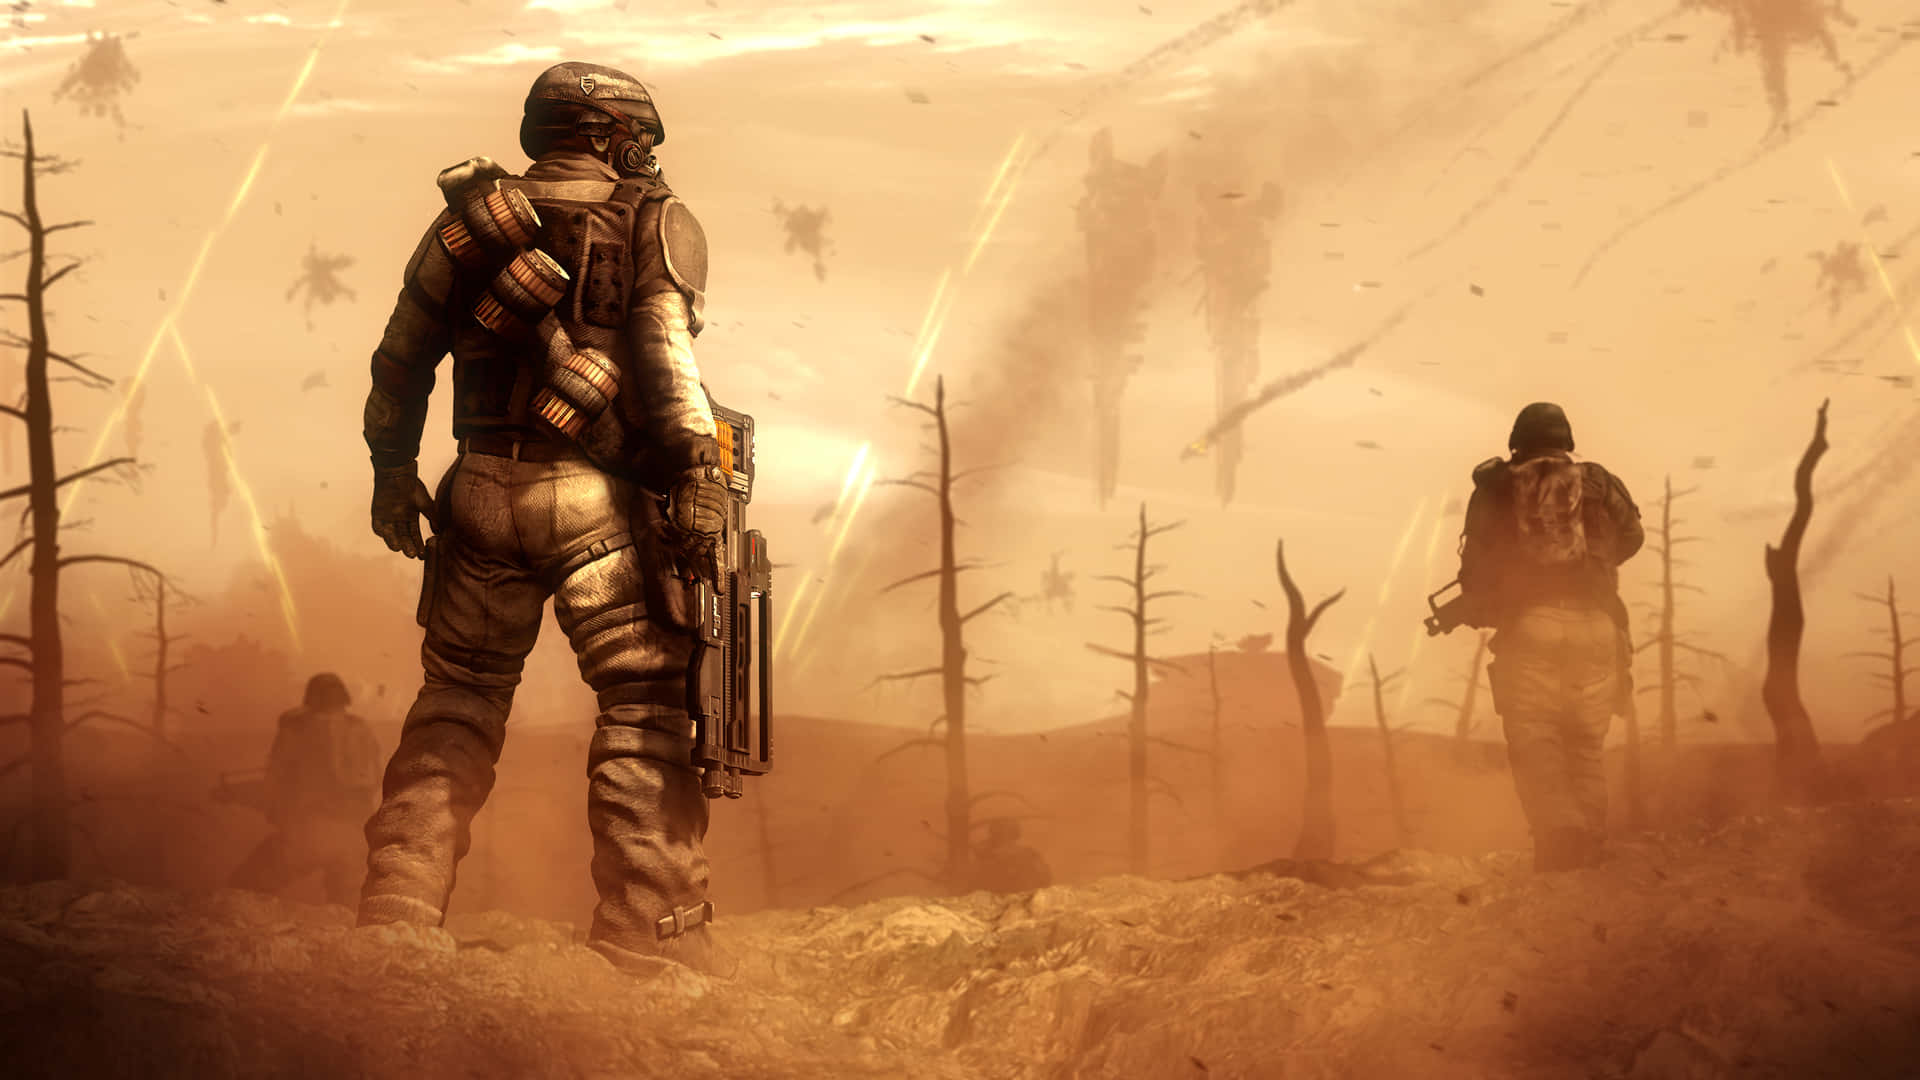 Exploring the Post-Apocalyptic World of Fallout 4 Wasteland Wallpaper